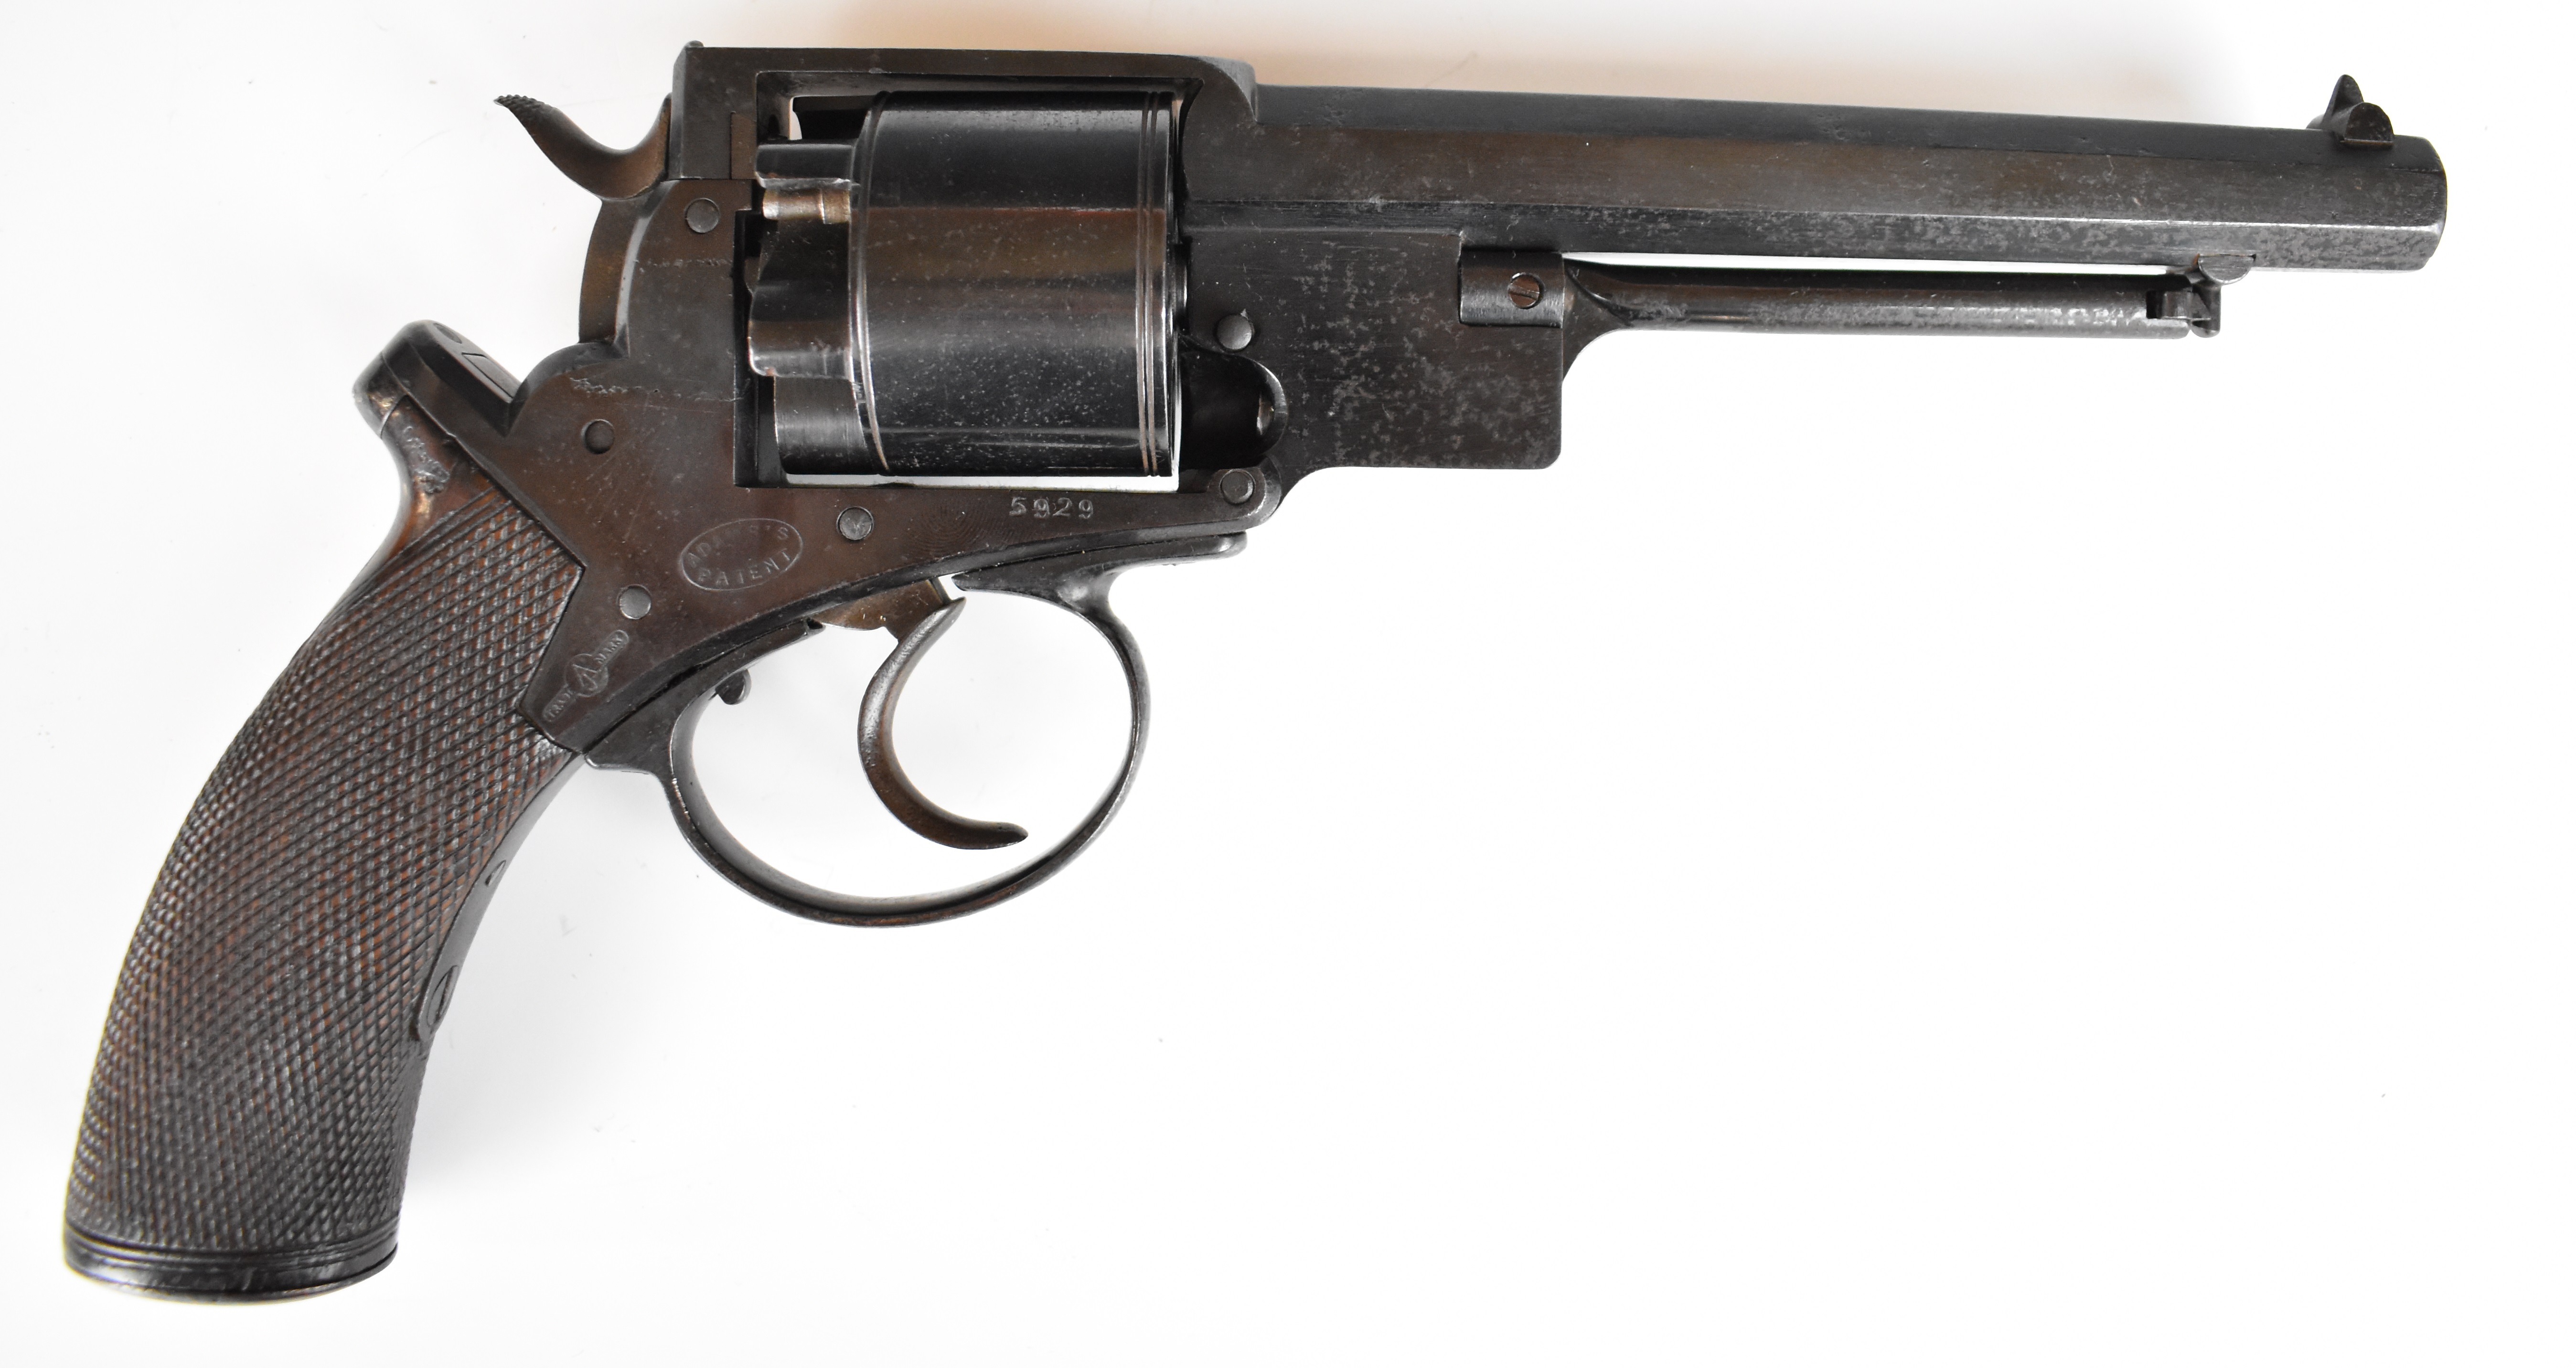 Adam's Patent 50 bore six-shot double-action revolver with chequered grip, line engraved cylinder, - Image 16 of 30